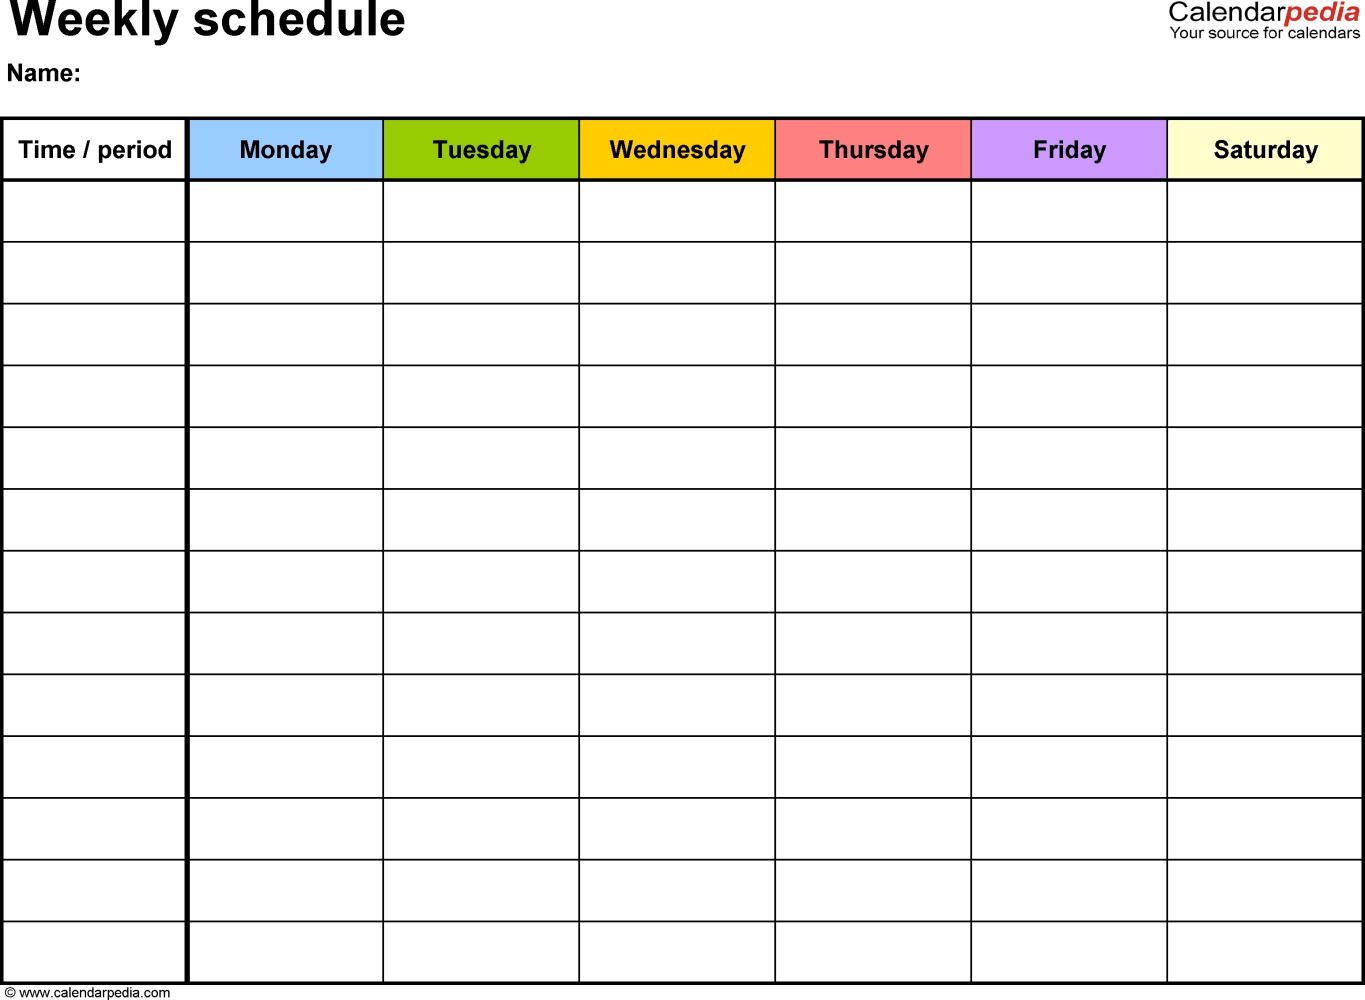 Appointment Calendar With Time Slots 2016 | Calendar Template 2018  Monthly Calendar Schedule With Time Slots